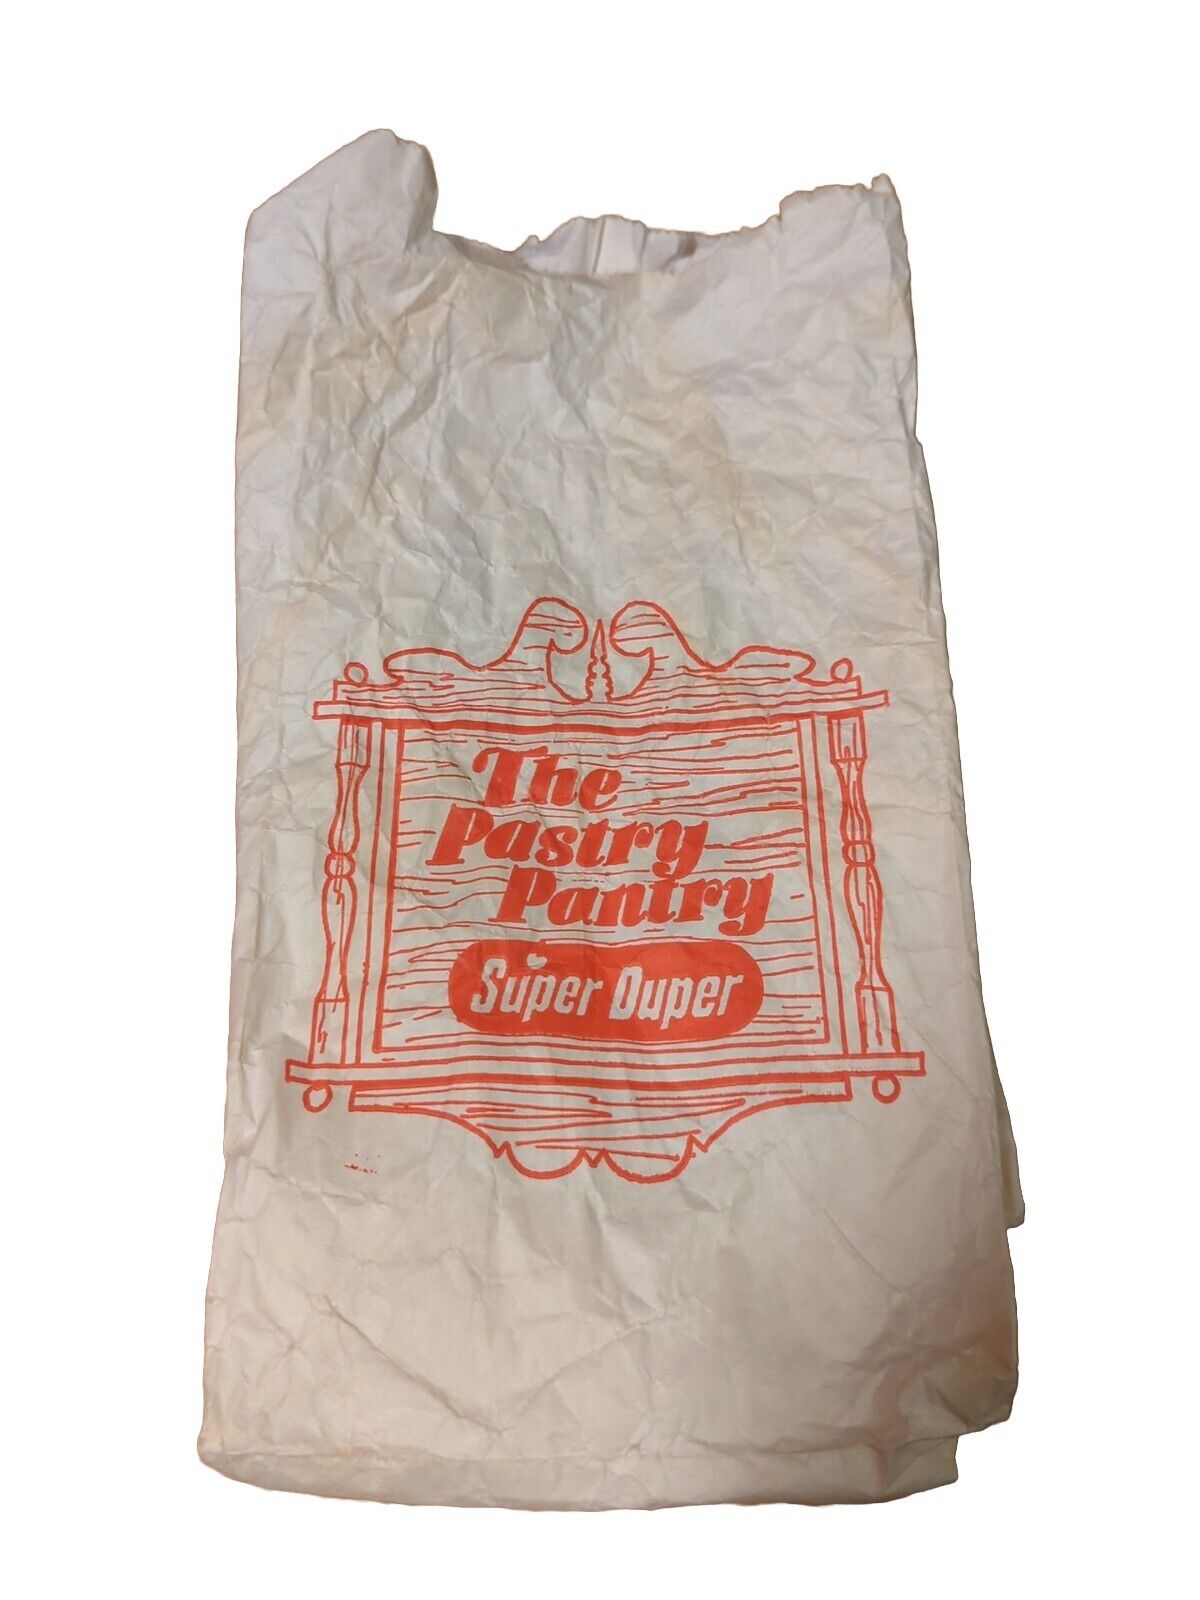 Super Duper Markets The Pastry Pantry Paper Bag White Vintage Buffalo Western NY